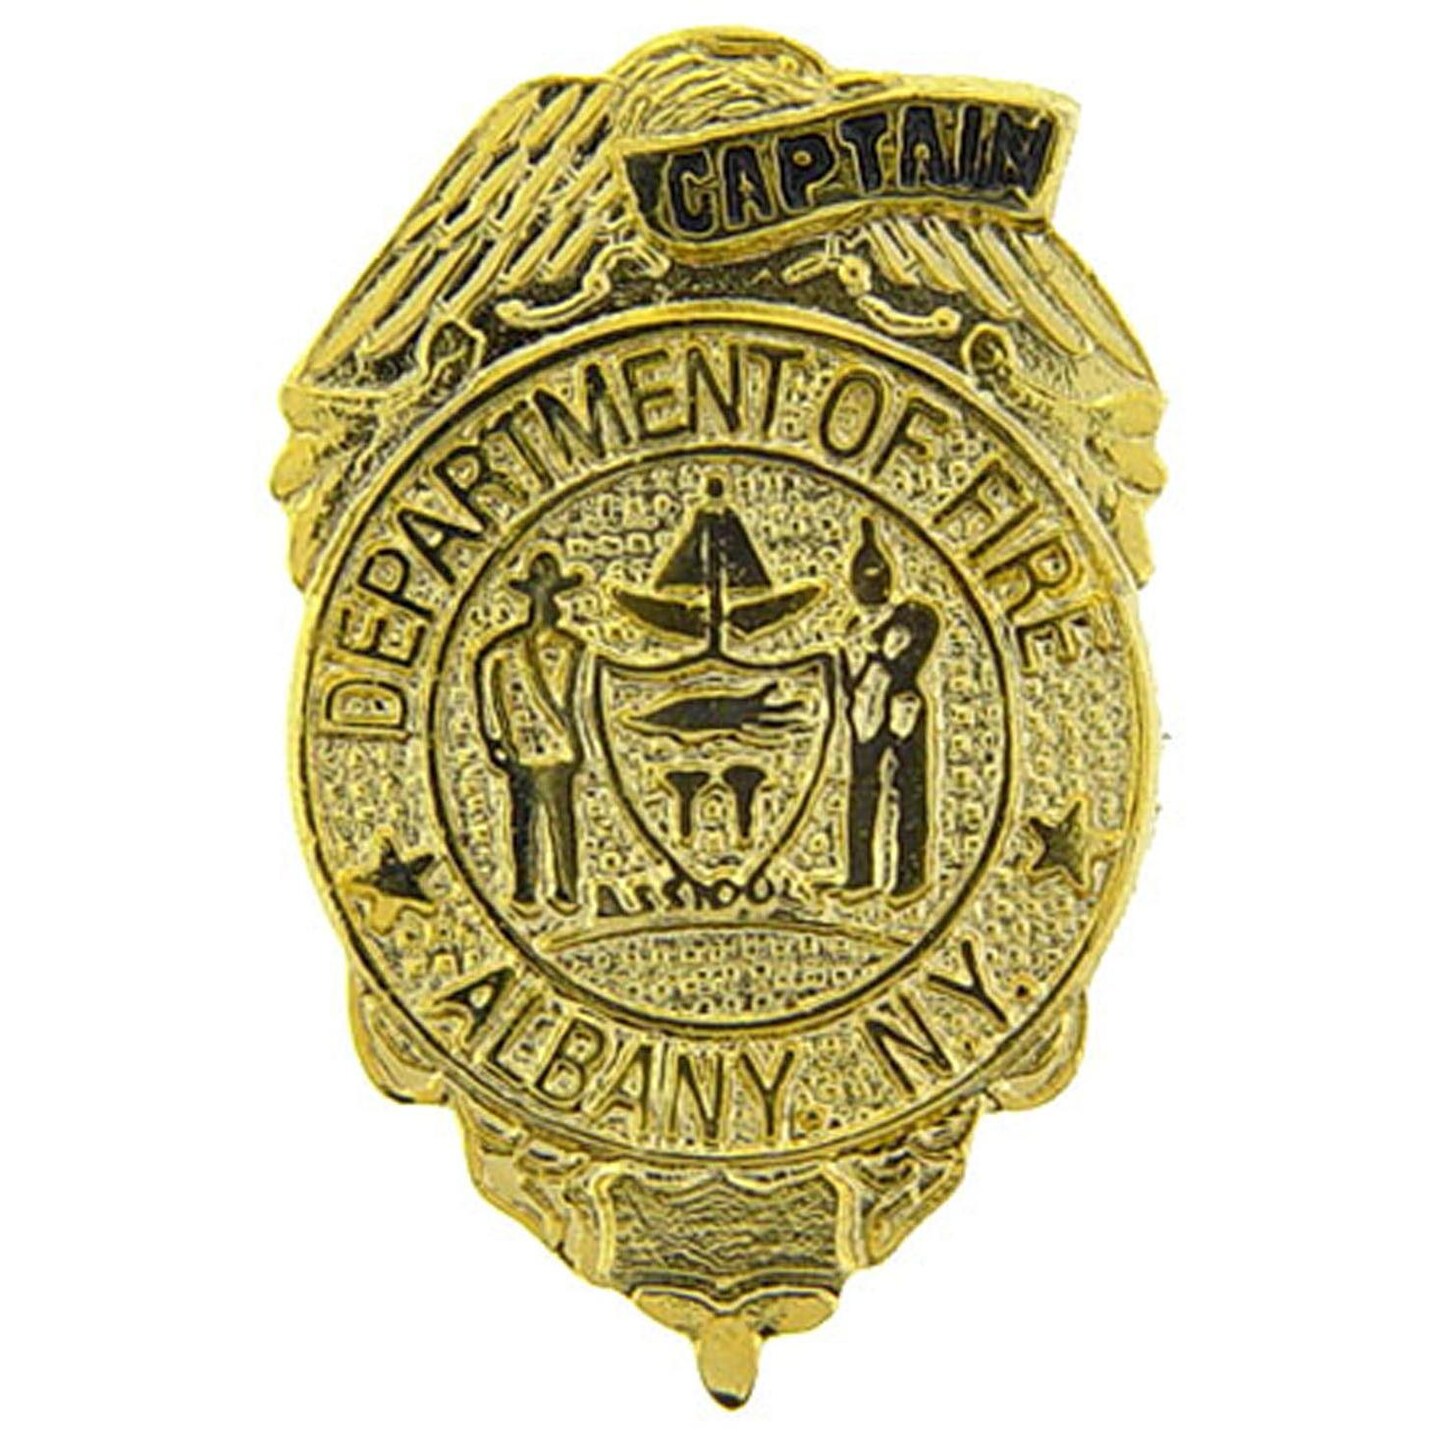 Albany New York Fire Department Captain Pin 1